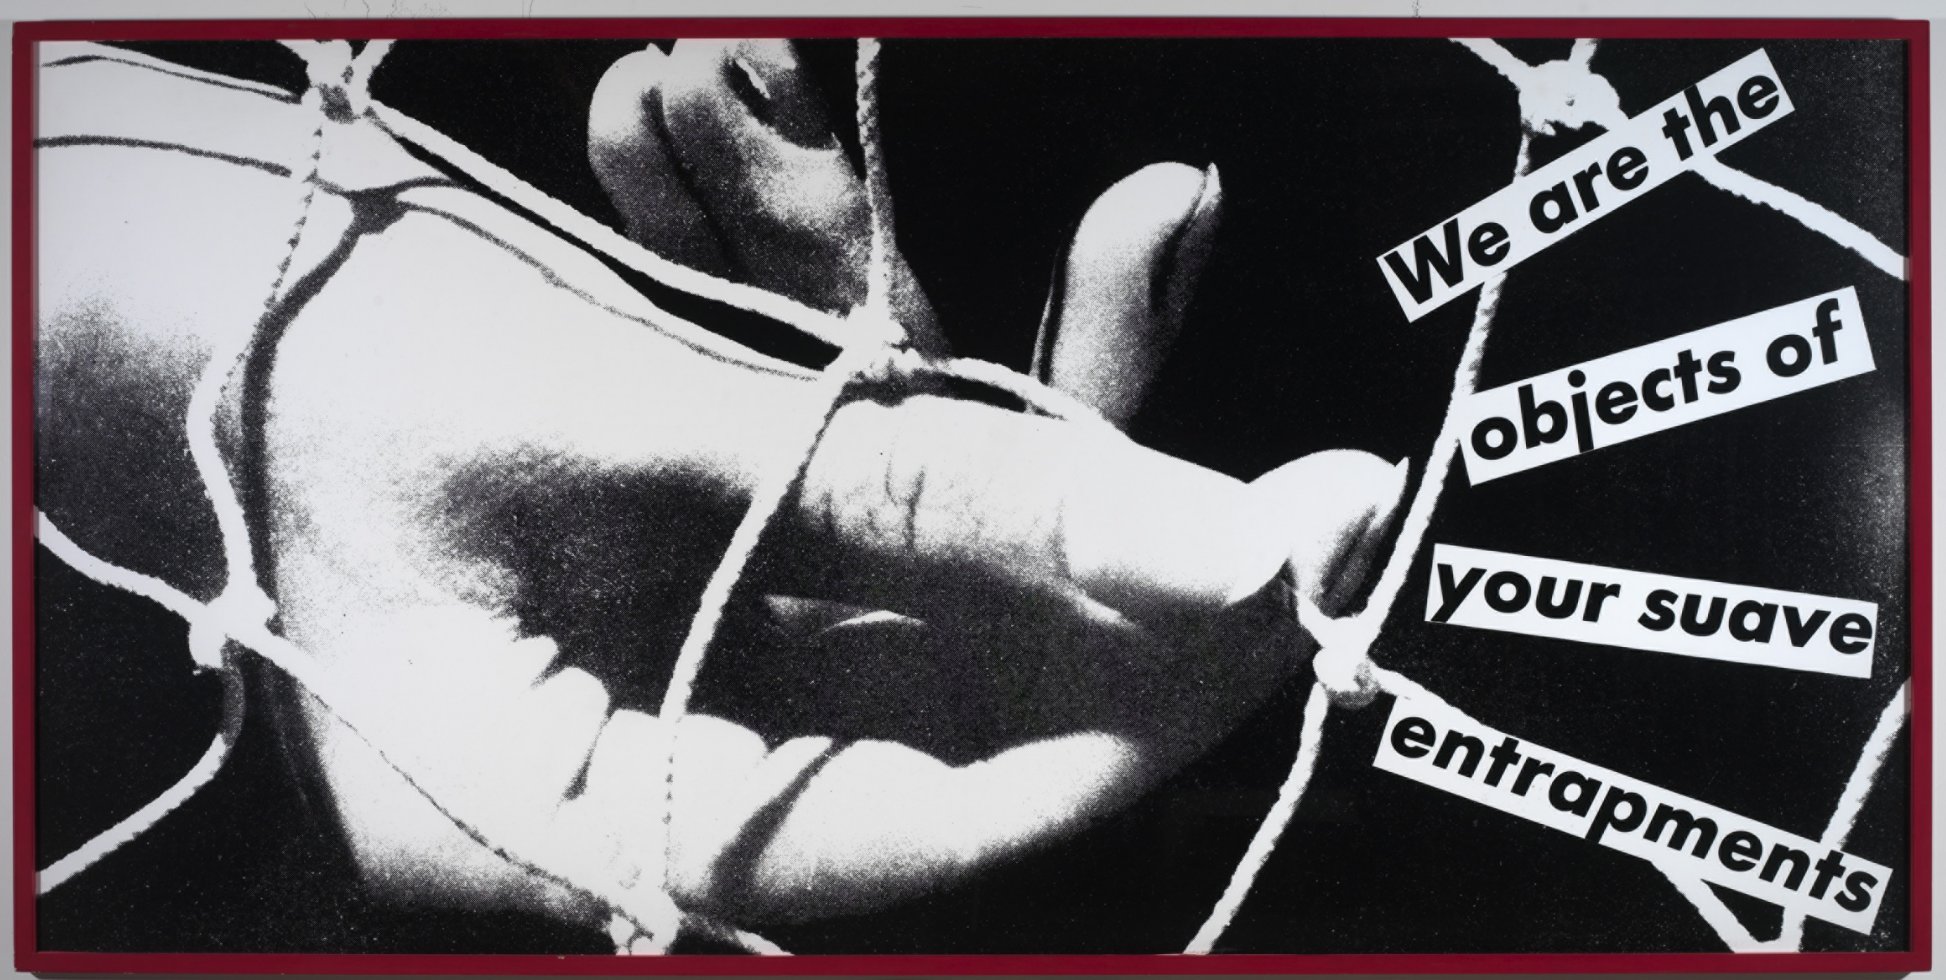 Sin Título (We Are the Objects of Your Suave Entrapments) (1984) - Barbara Kruger